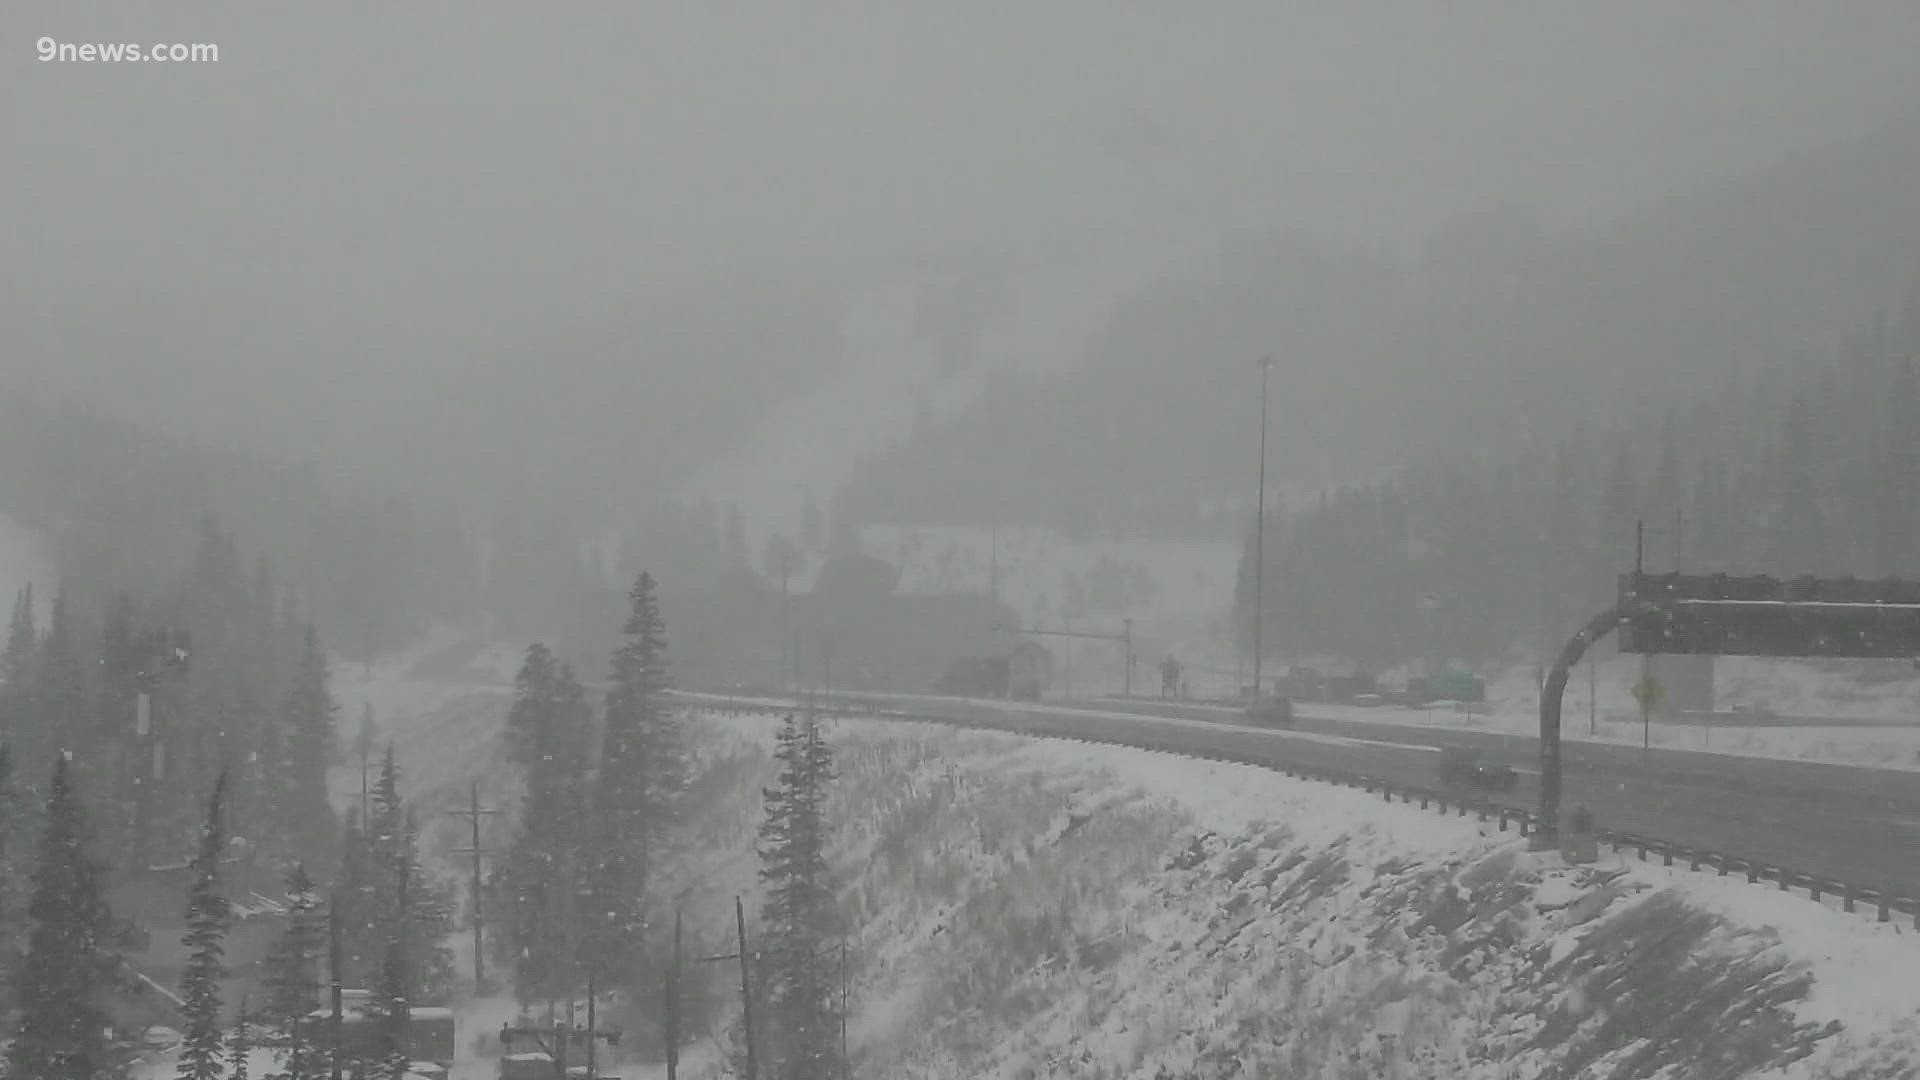 Snow has been falling in the high country, and drizzle is starting in downtown Denver.